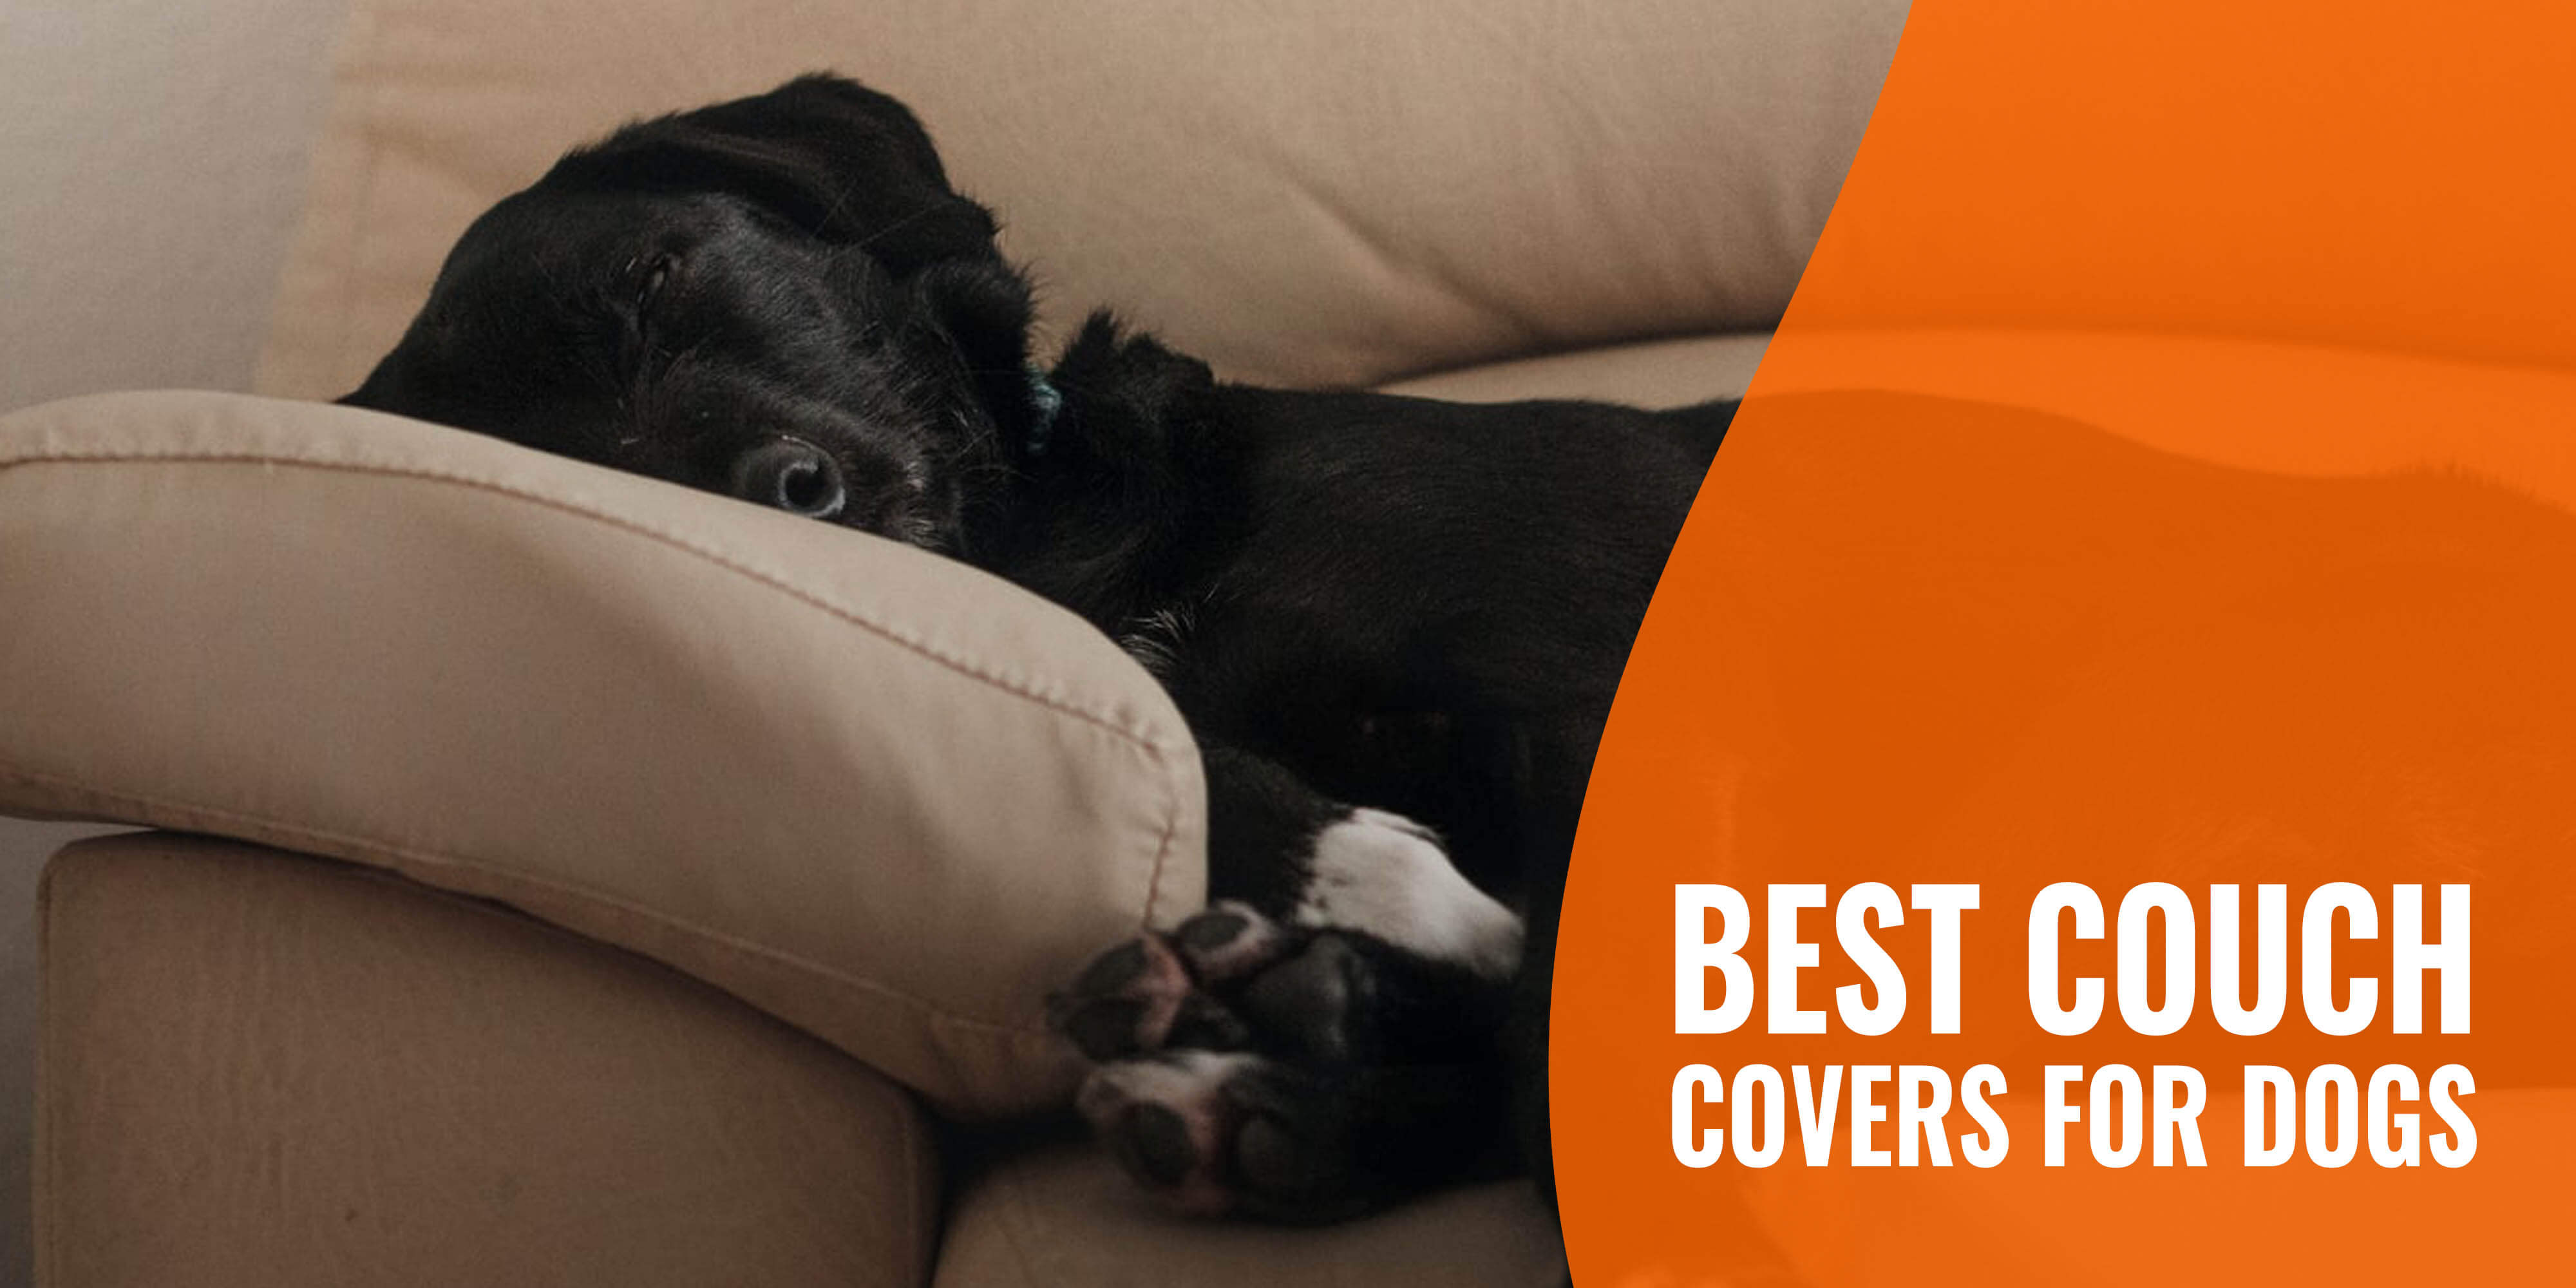 10 Best Couch Covers For Dogs Reviews, What Is The Best Sofa Cover For Dogs